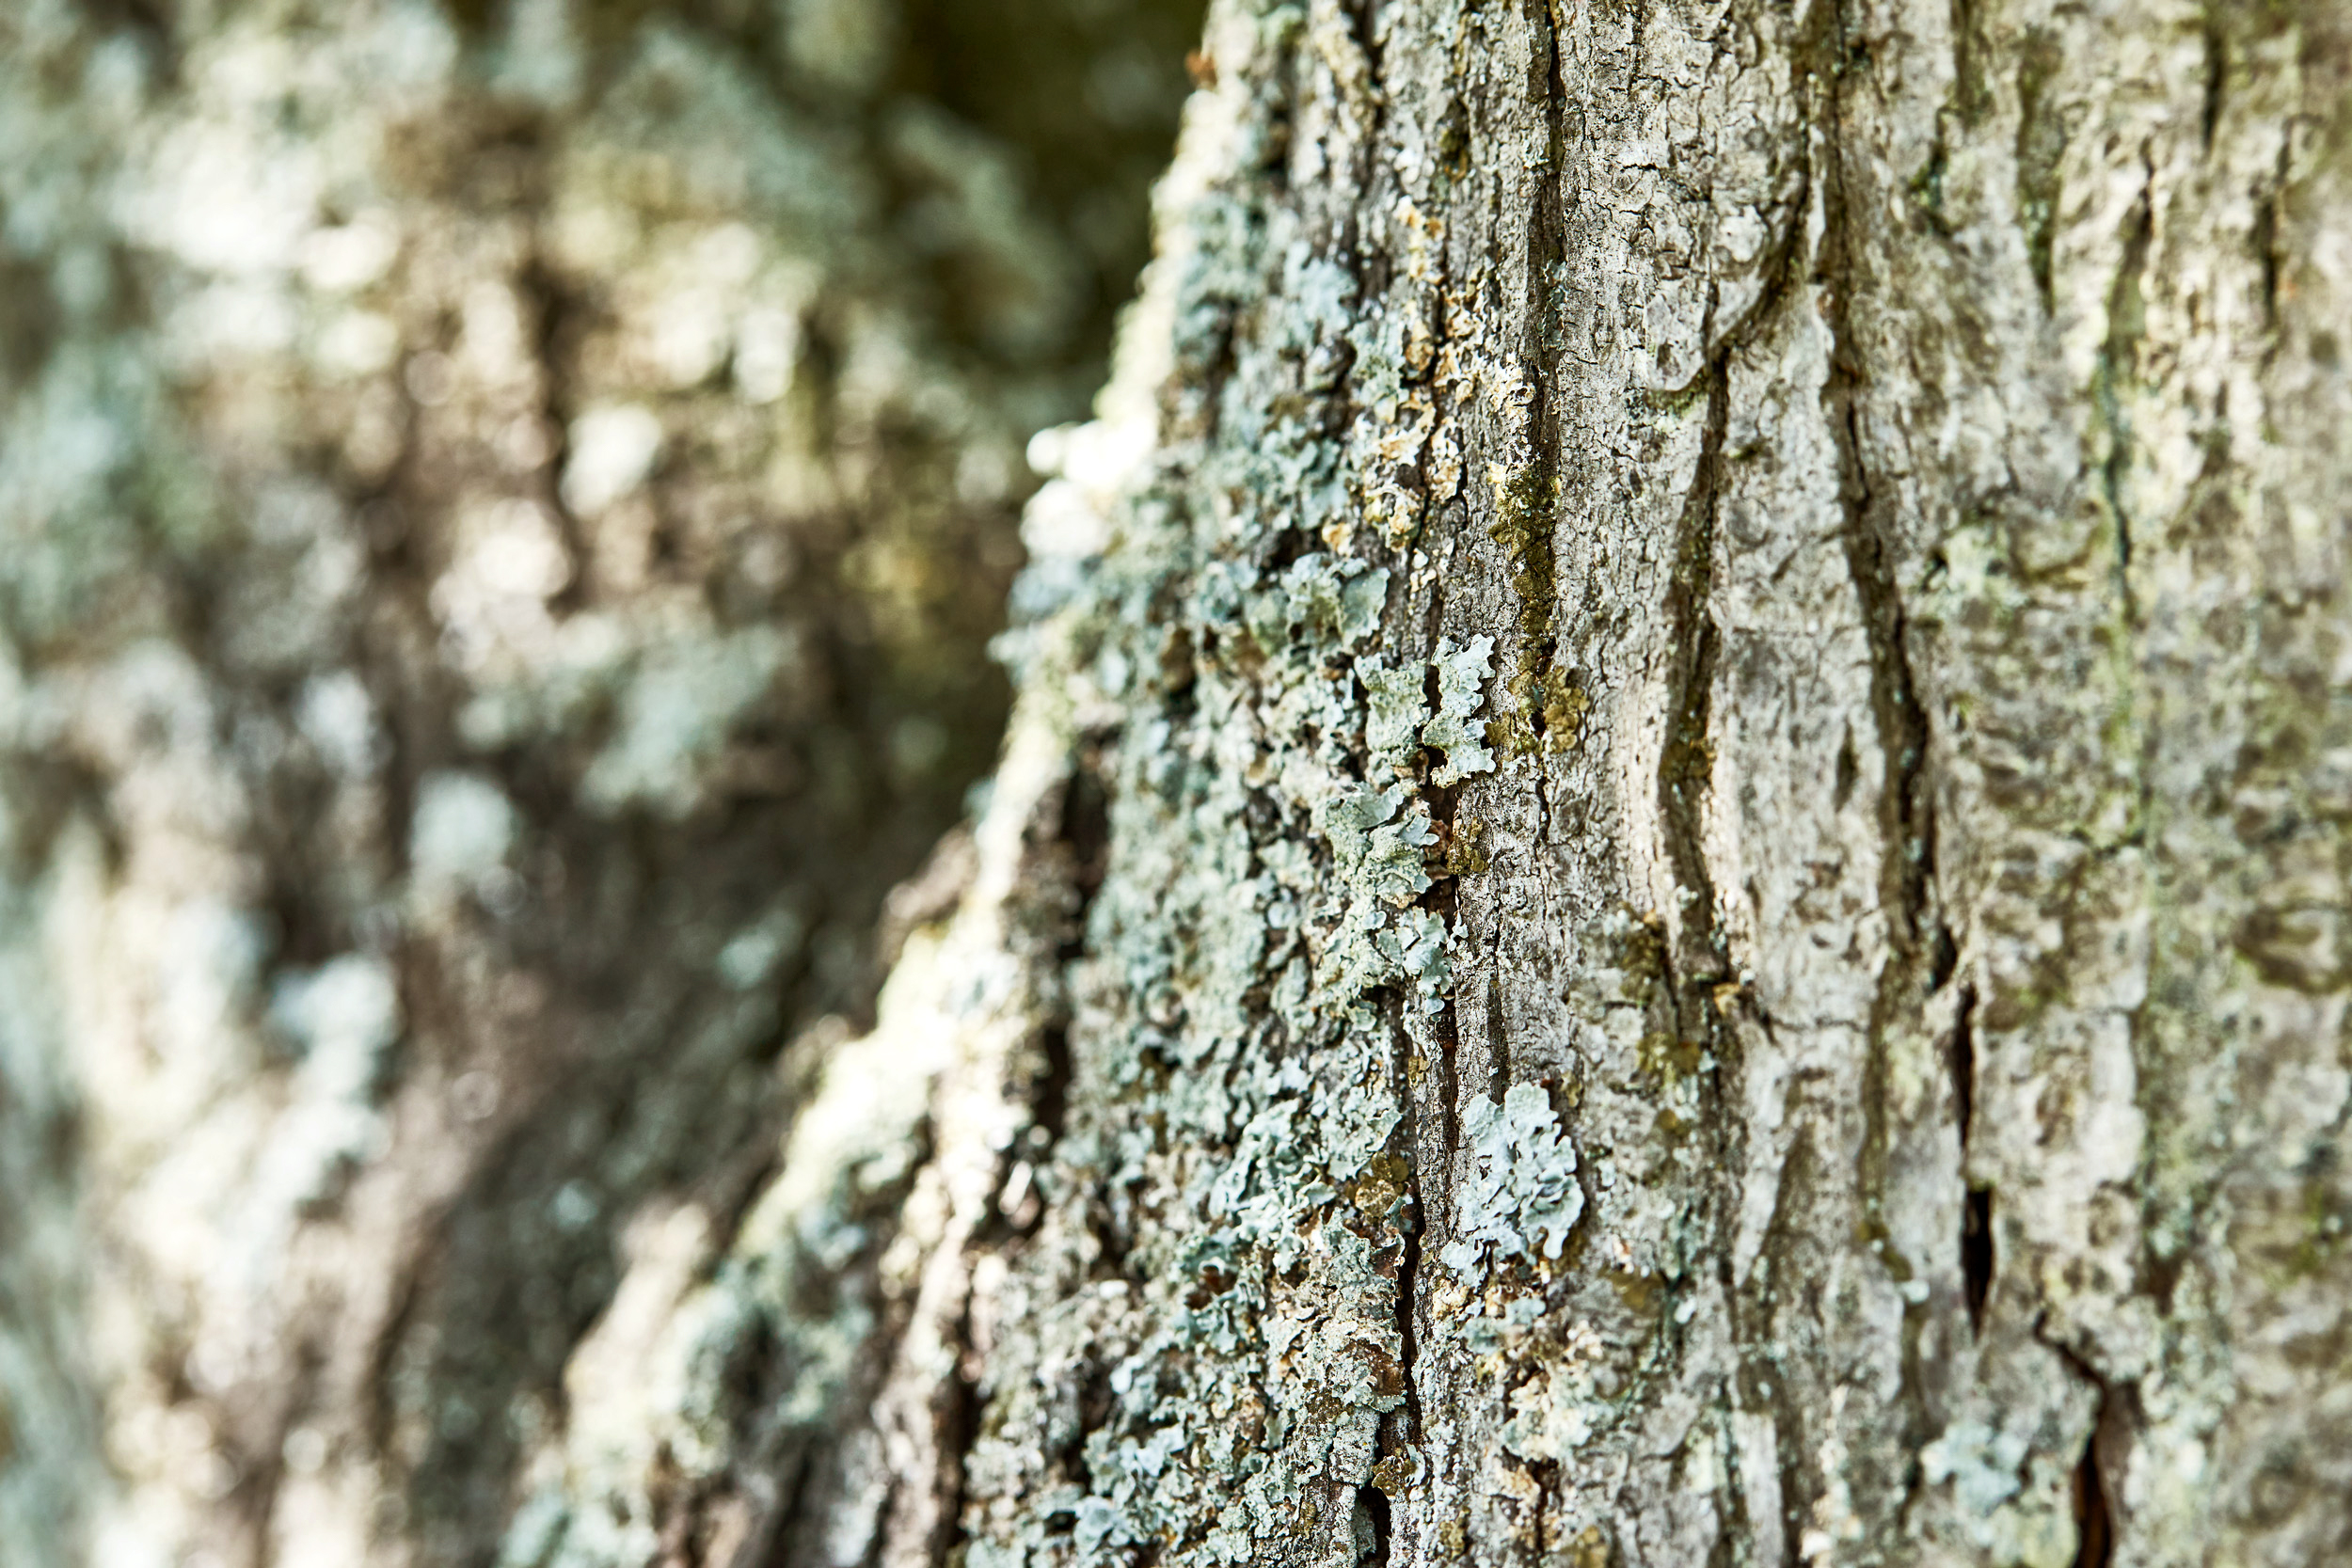 Close-up of tree bark with some lichens